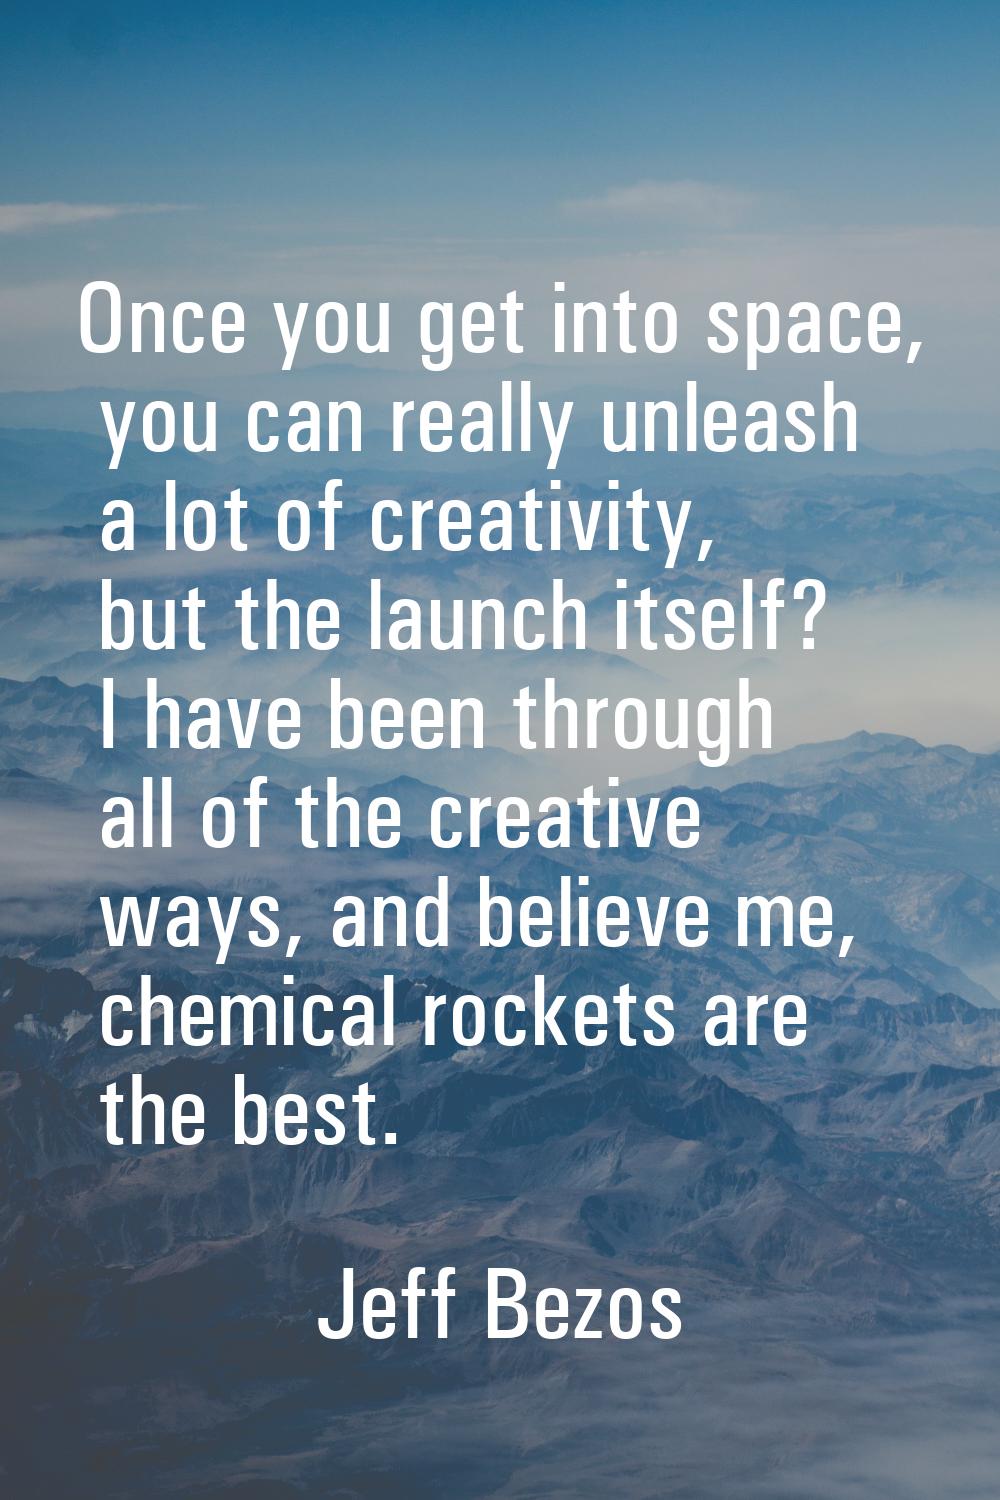 Once you get into space, you can really unleash a lot of creativity, but the launch itself? I have 